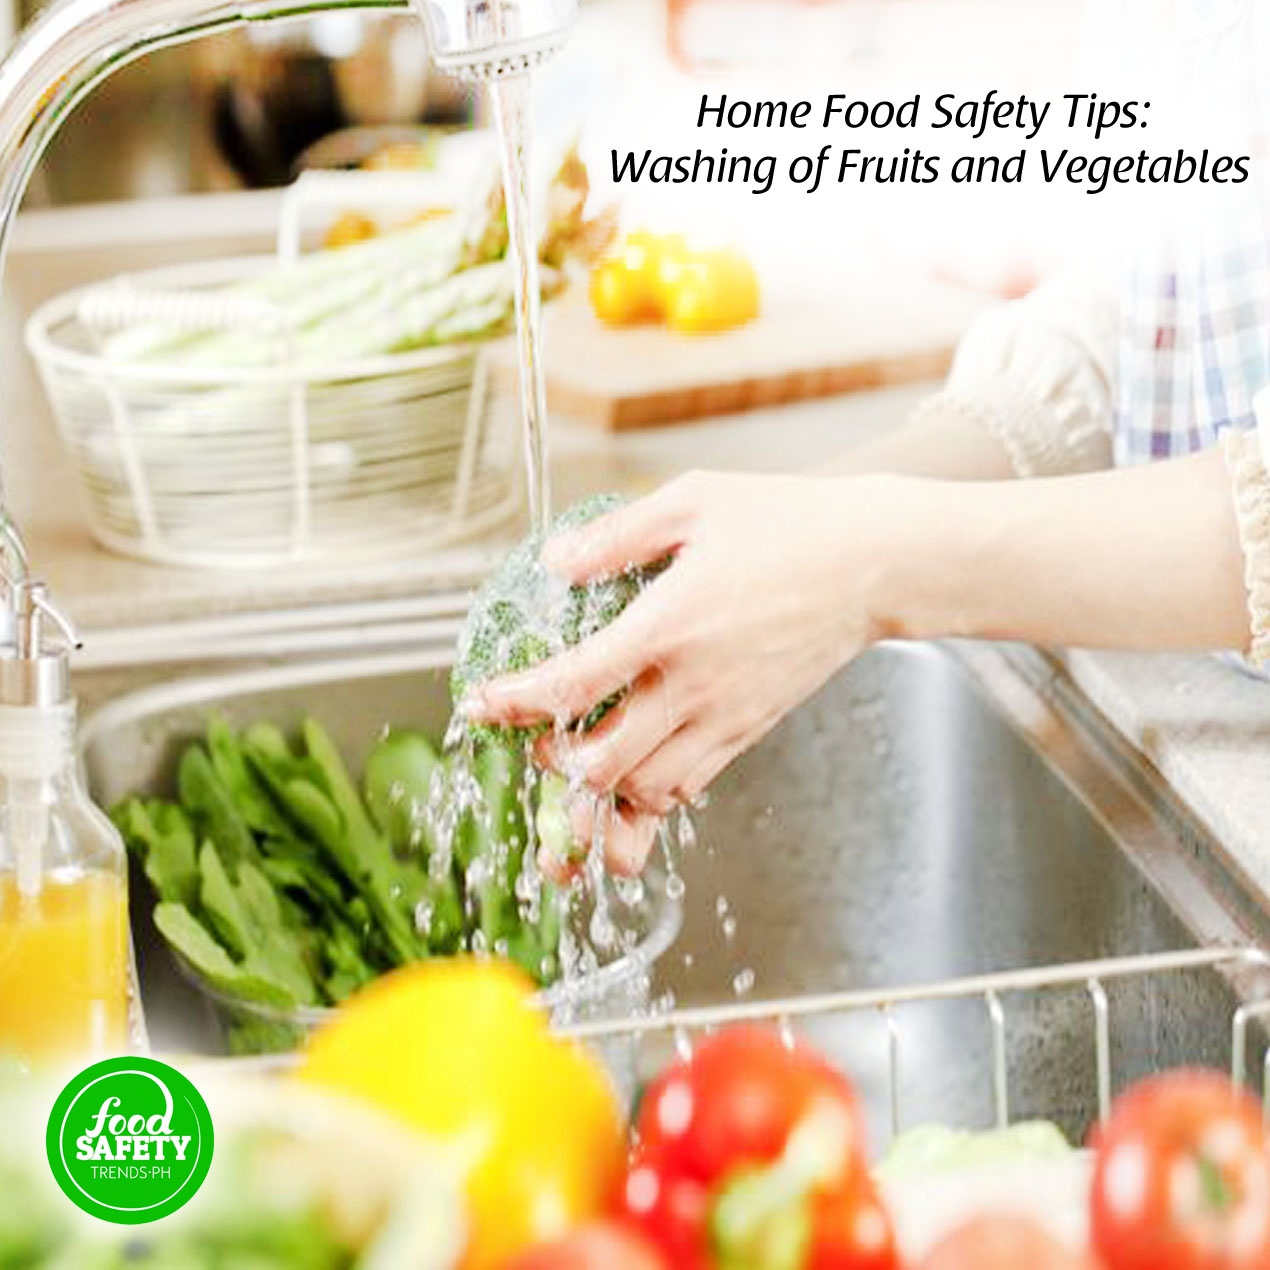 Home Safety Tips: Washing of Fruits and Vegetables